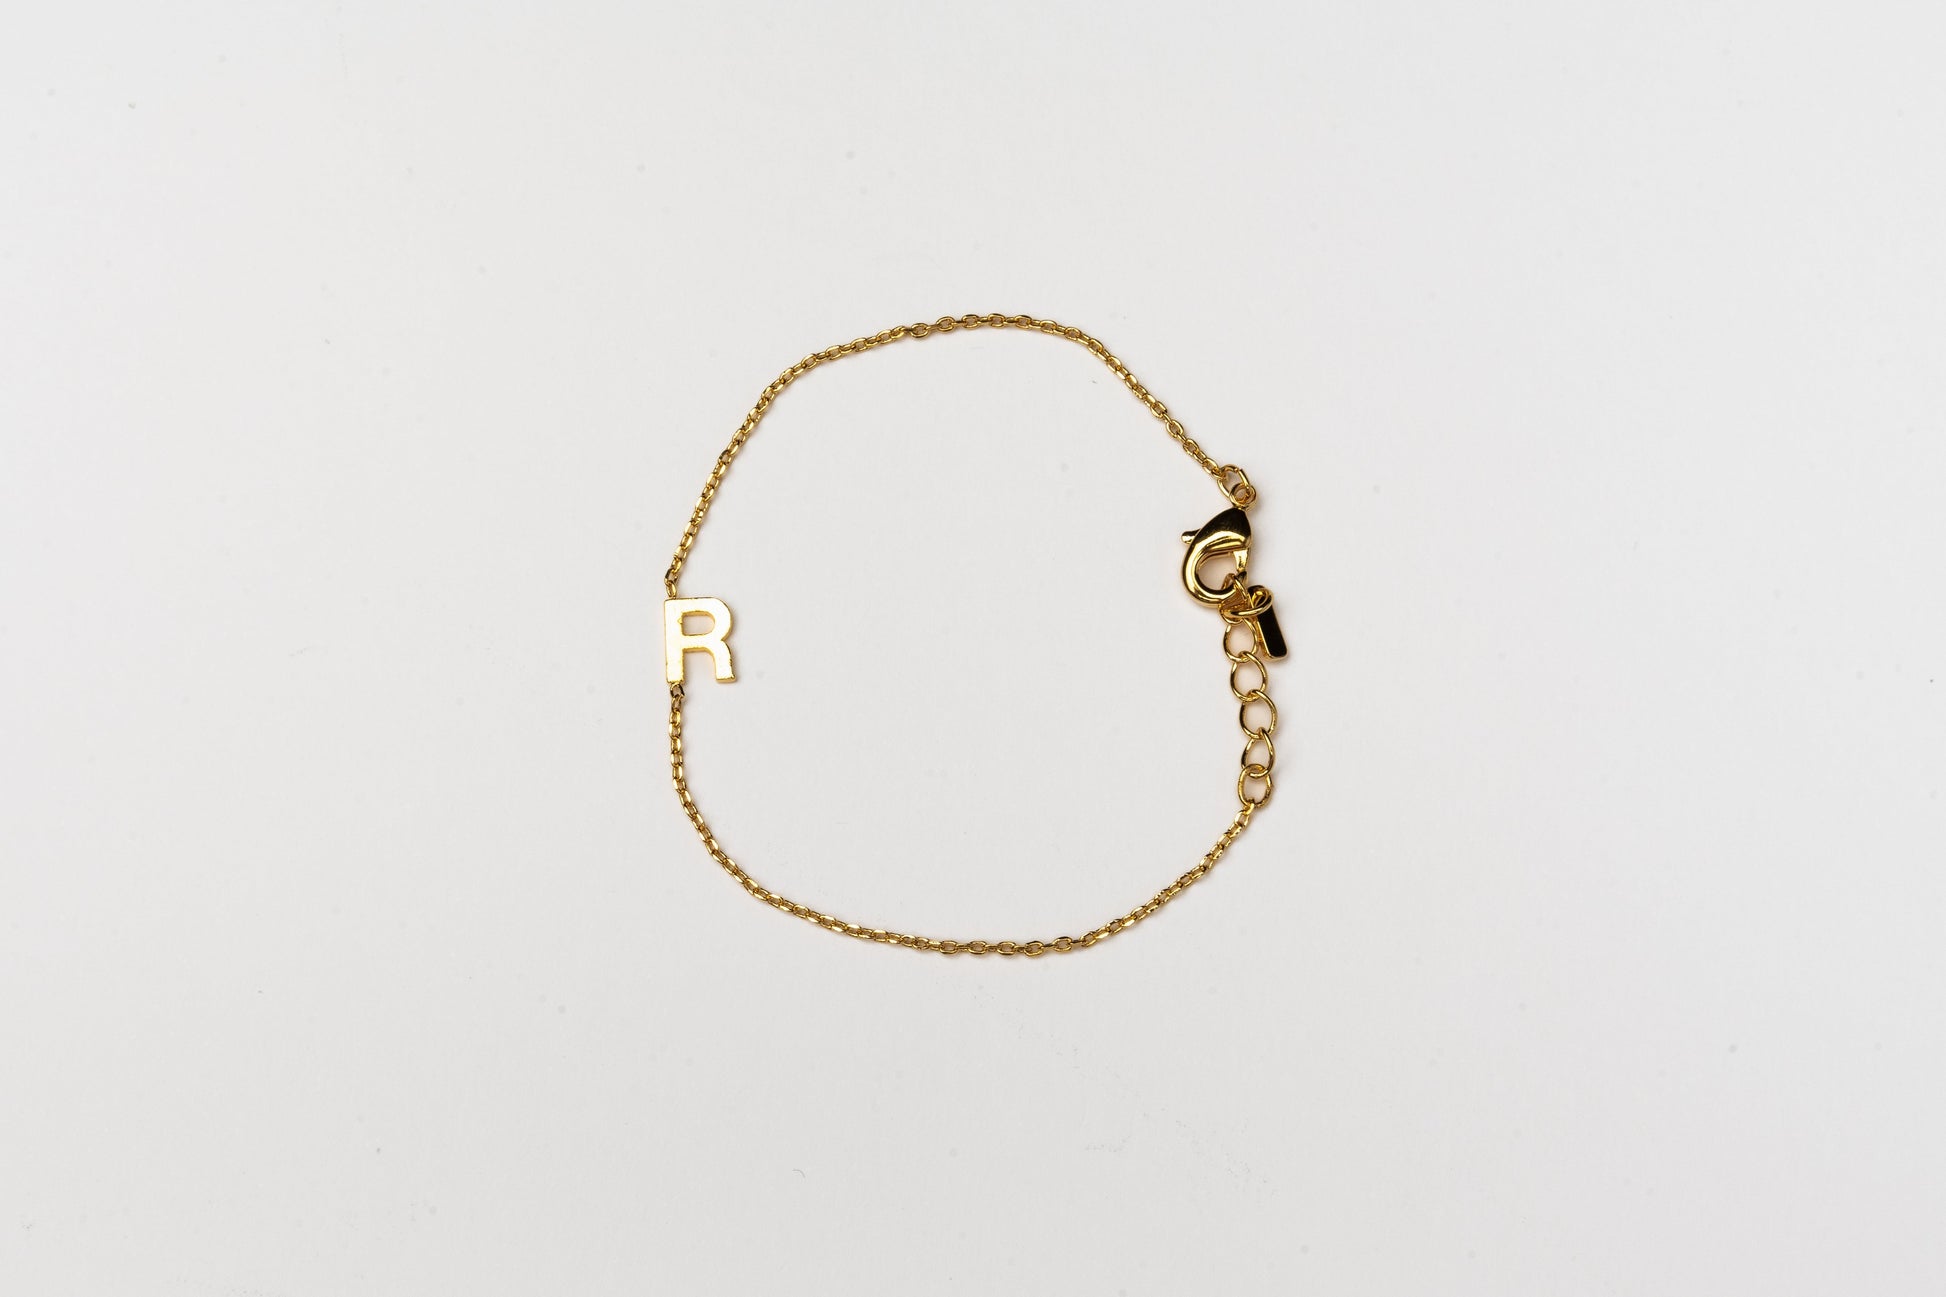 Cove Kid's Initial Bracelet KID'S BRACELET Cove Accessories 18k Gold Plated 1-4 Year/5" + 1/2" ext R